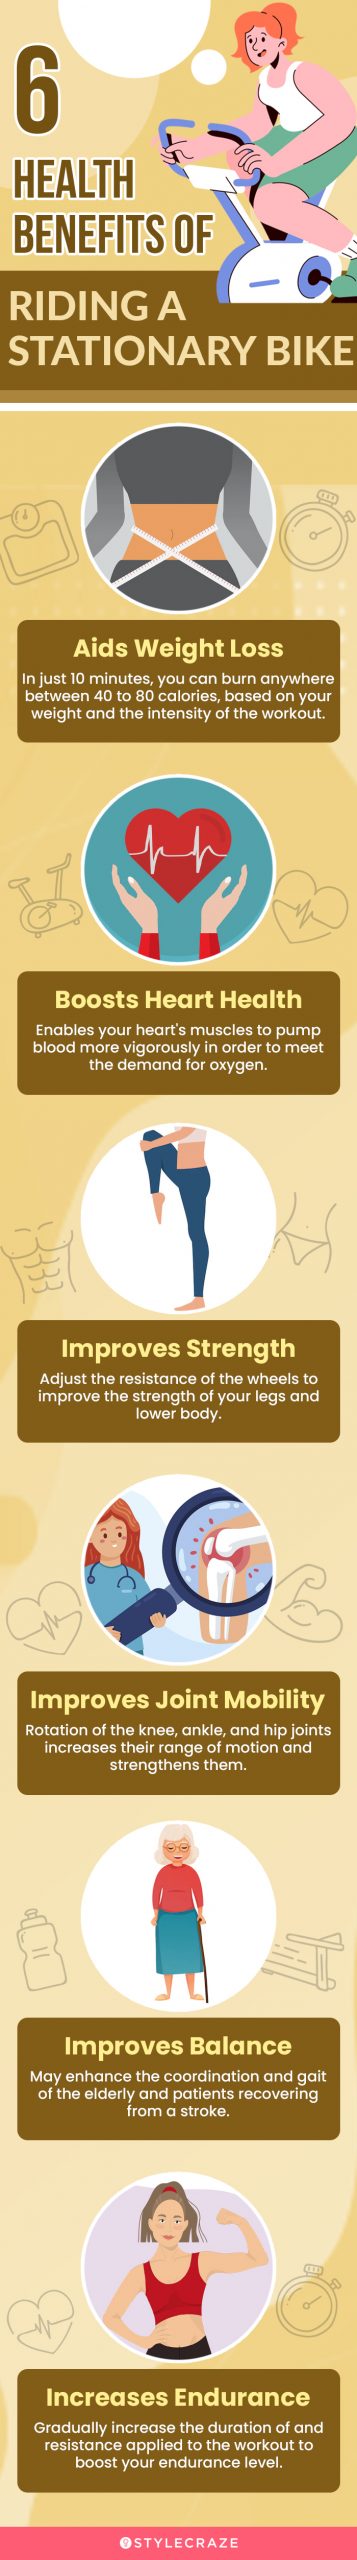 6 health benefits of riding a stationary bike (infographic)